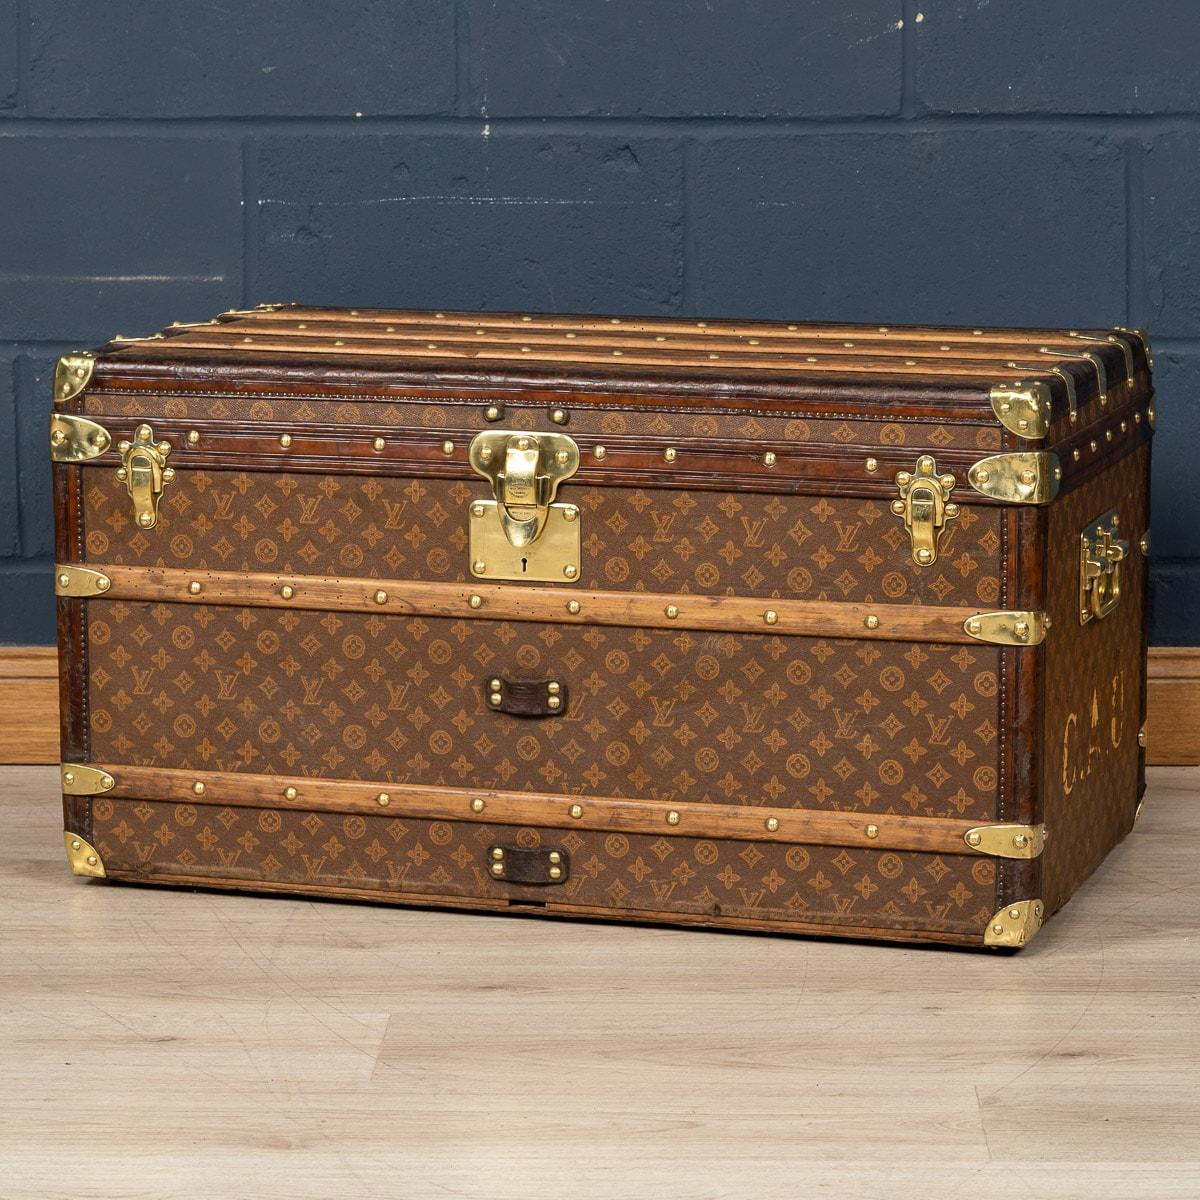 Gorgeous and most importantly complete, this early 20th century Louis Vuitton trunk was the must have item of any elite traveller. Covered in the world famous LV monogrammed canvas, with its leather trim and brass fitting it would have been the top